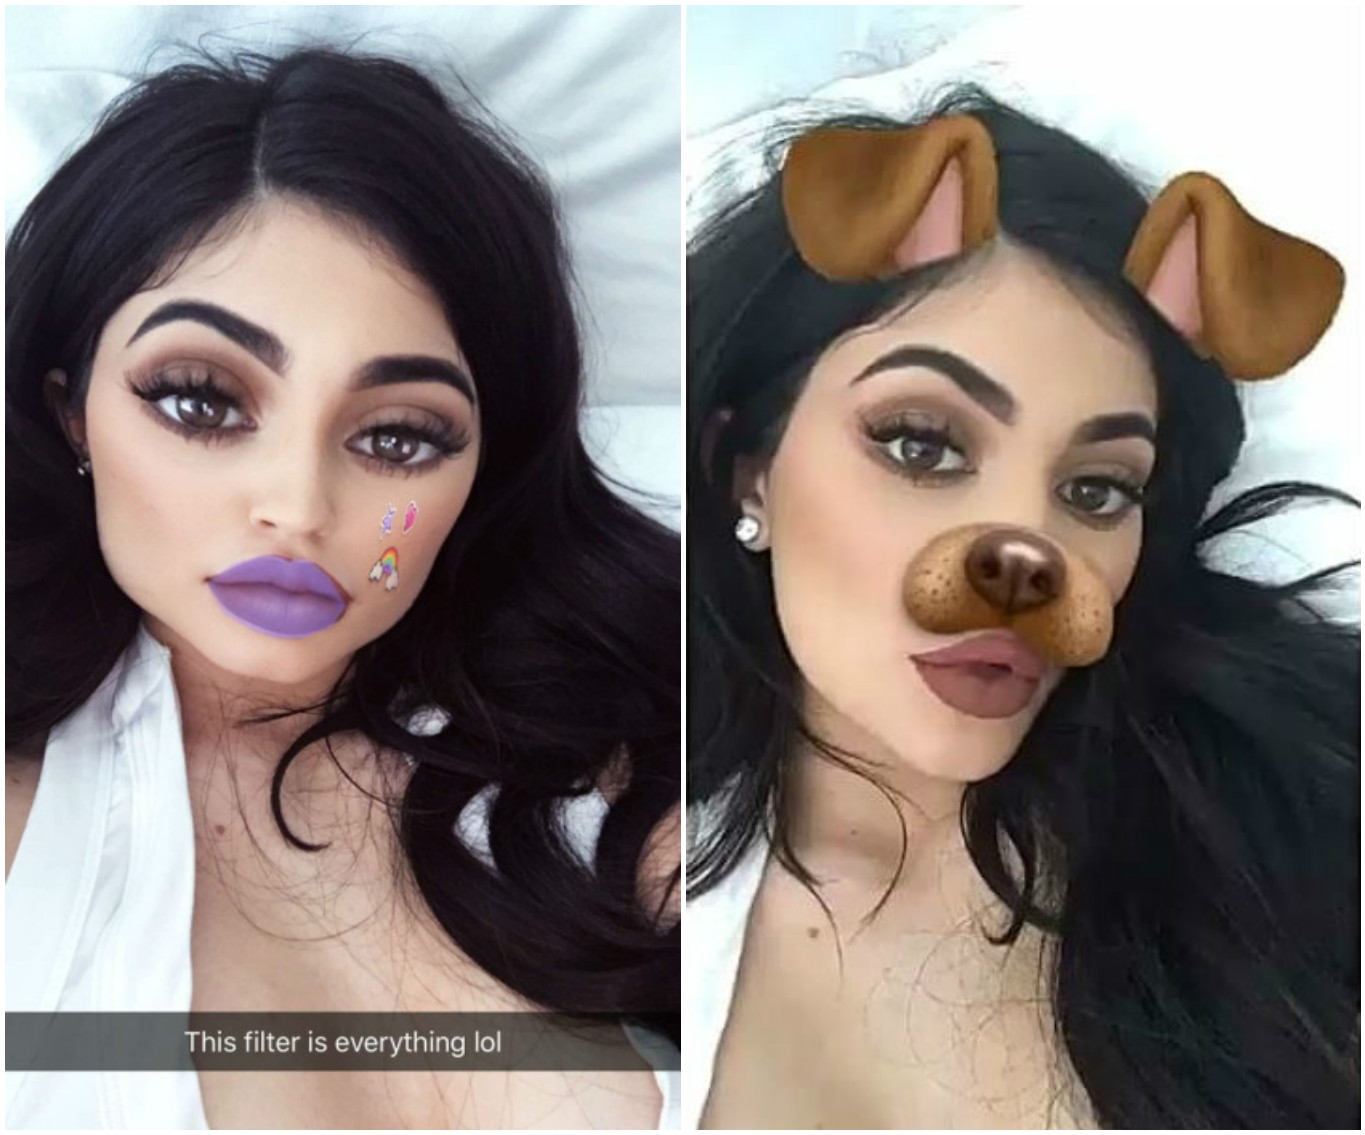 Kylie Jenner, one of the most followed celebrities on Snapchat, in two selfies edited with popular filters (@KylizzleMyNizzl on Snapchat)